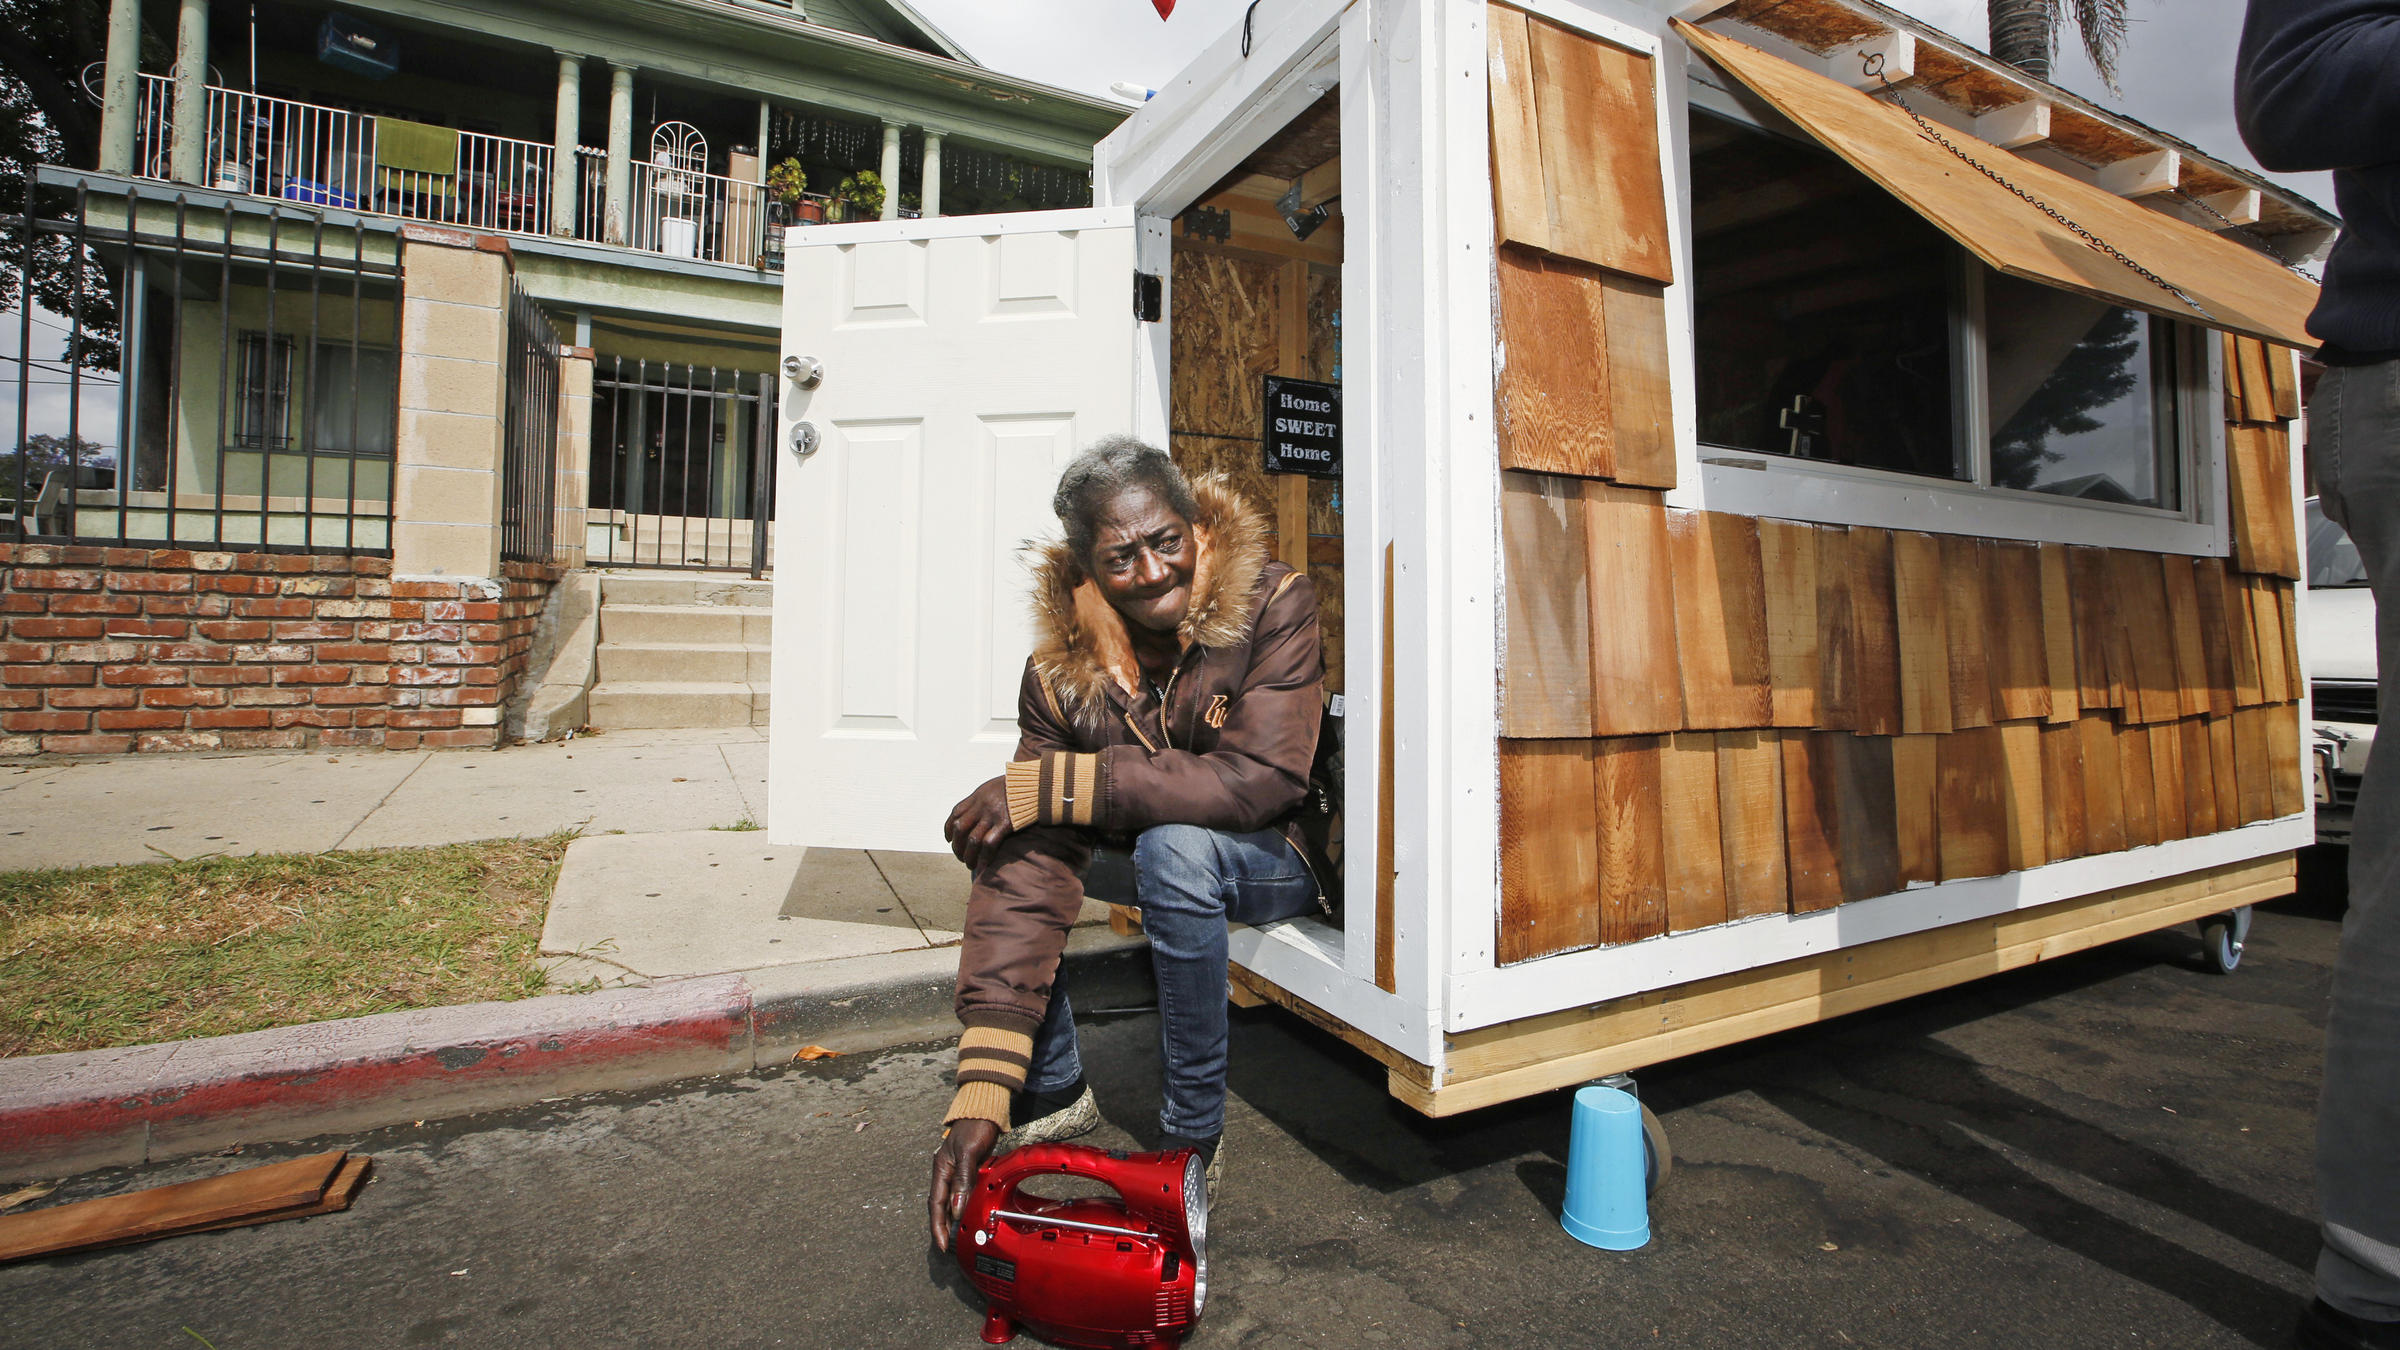 LA Officials Bring The Hammer Down On Tiny Houses For Homeless | KNKX